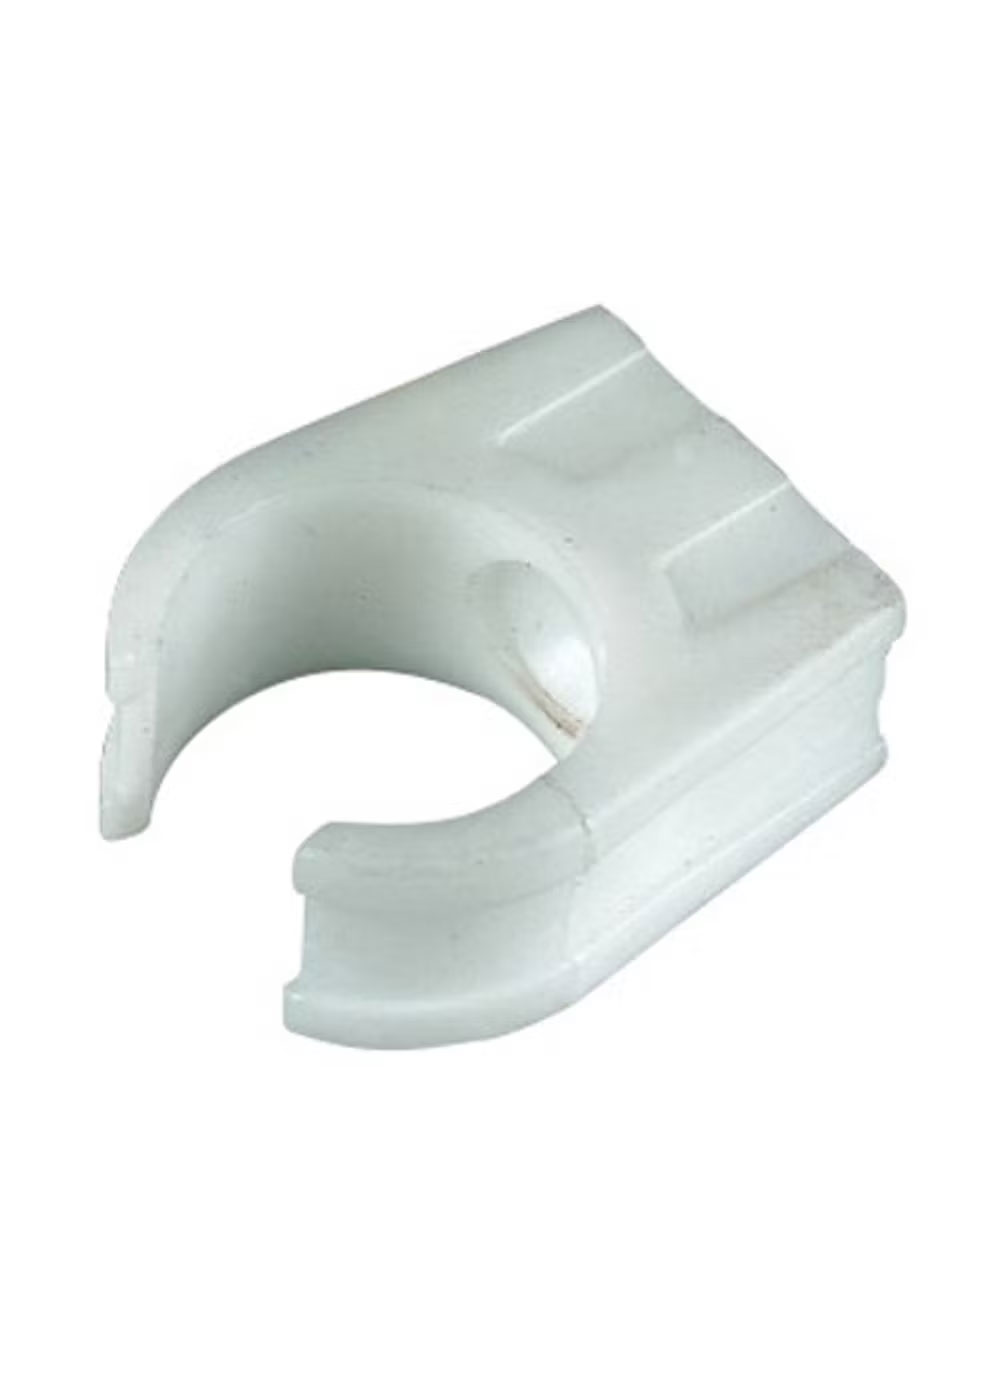 Overflow Pipe Clip 21.5mm White